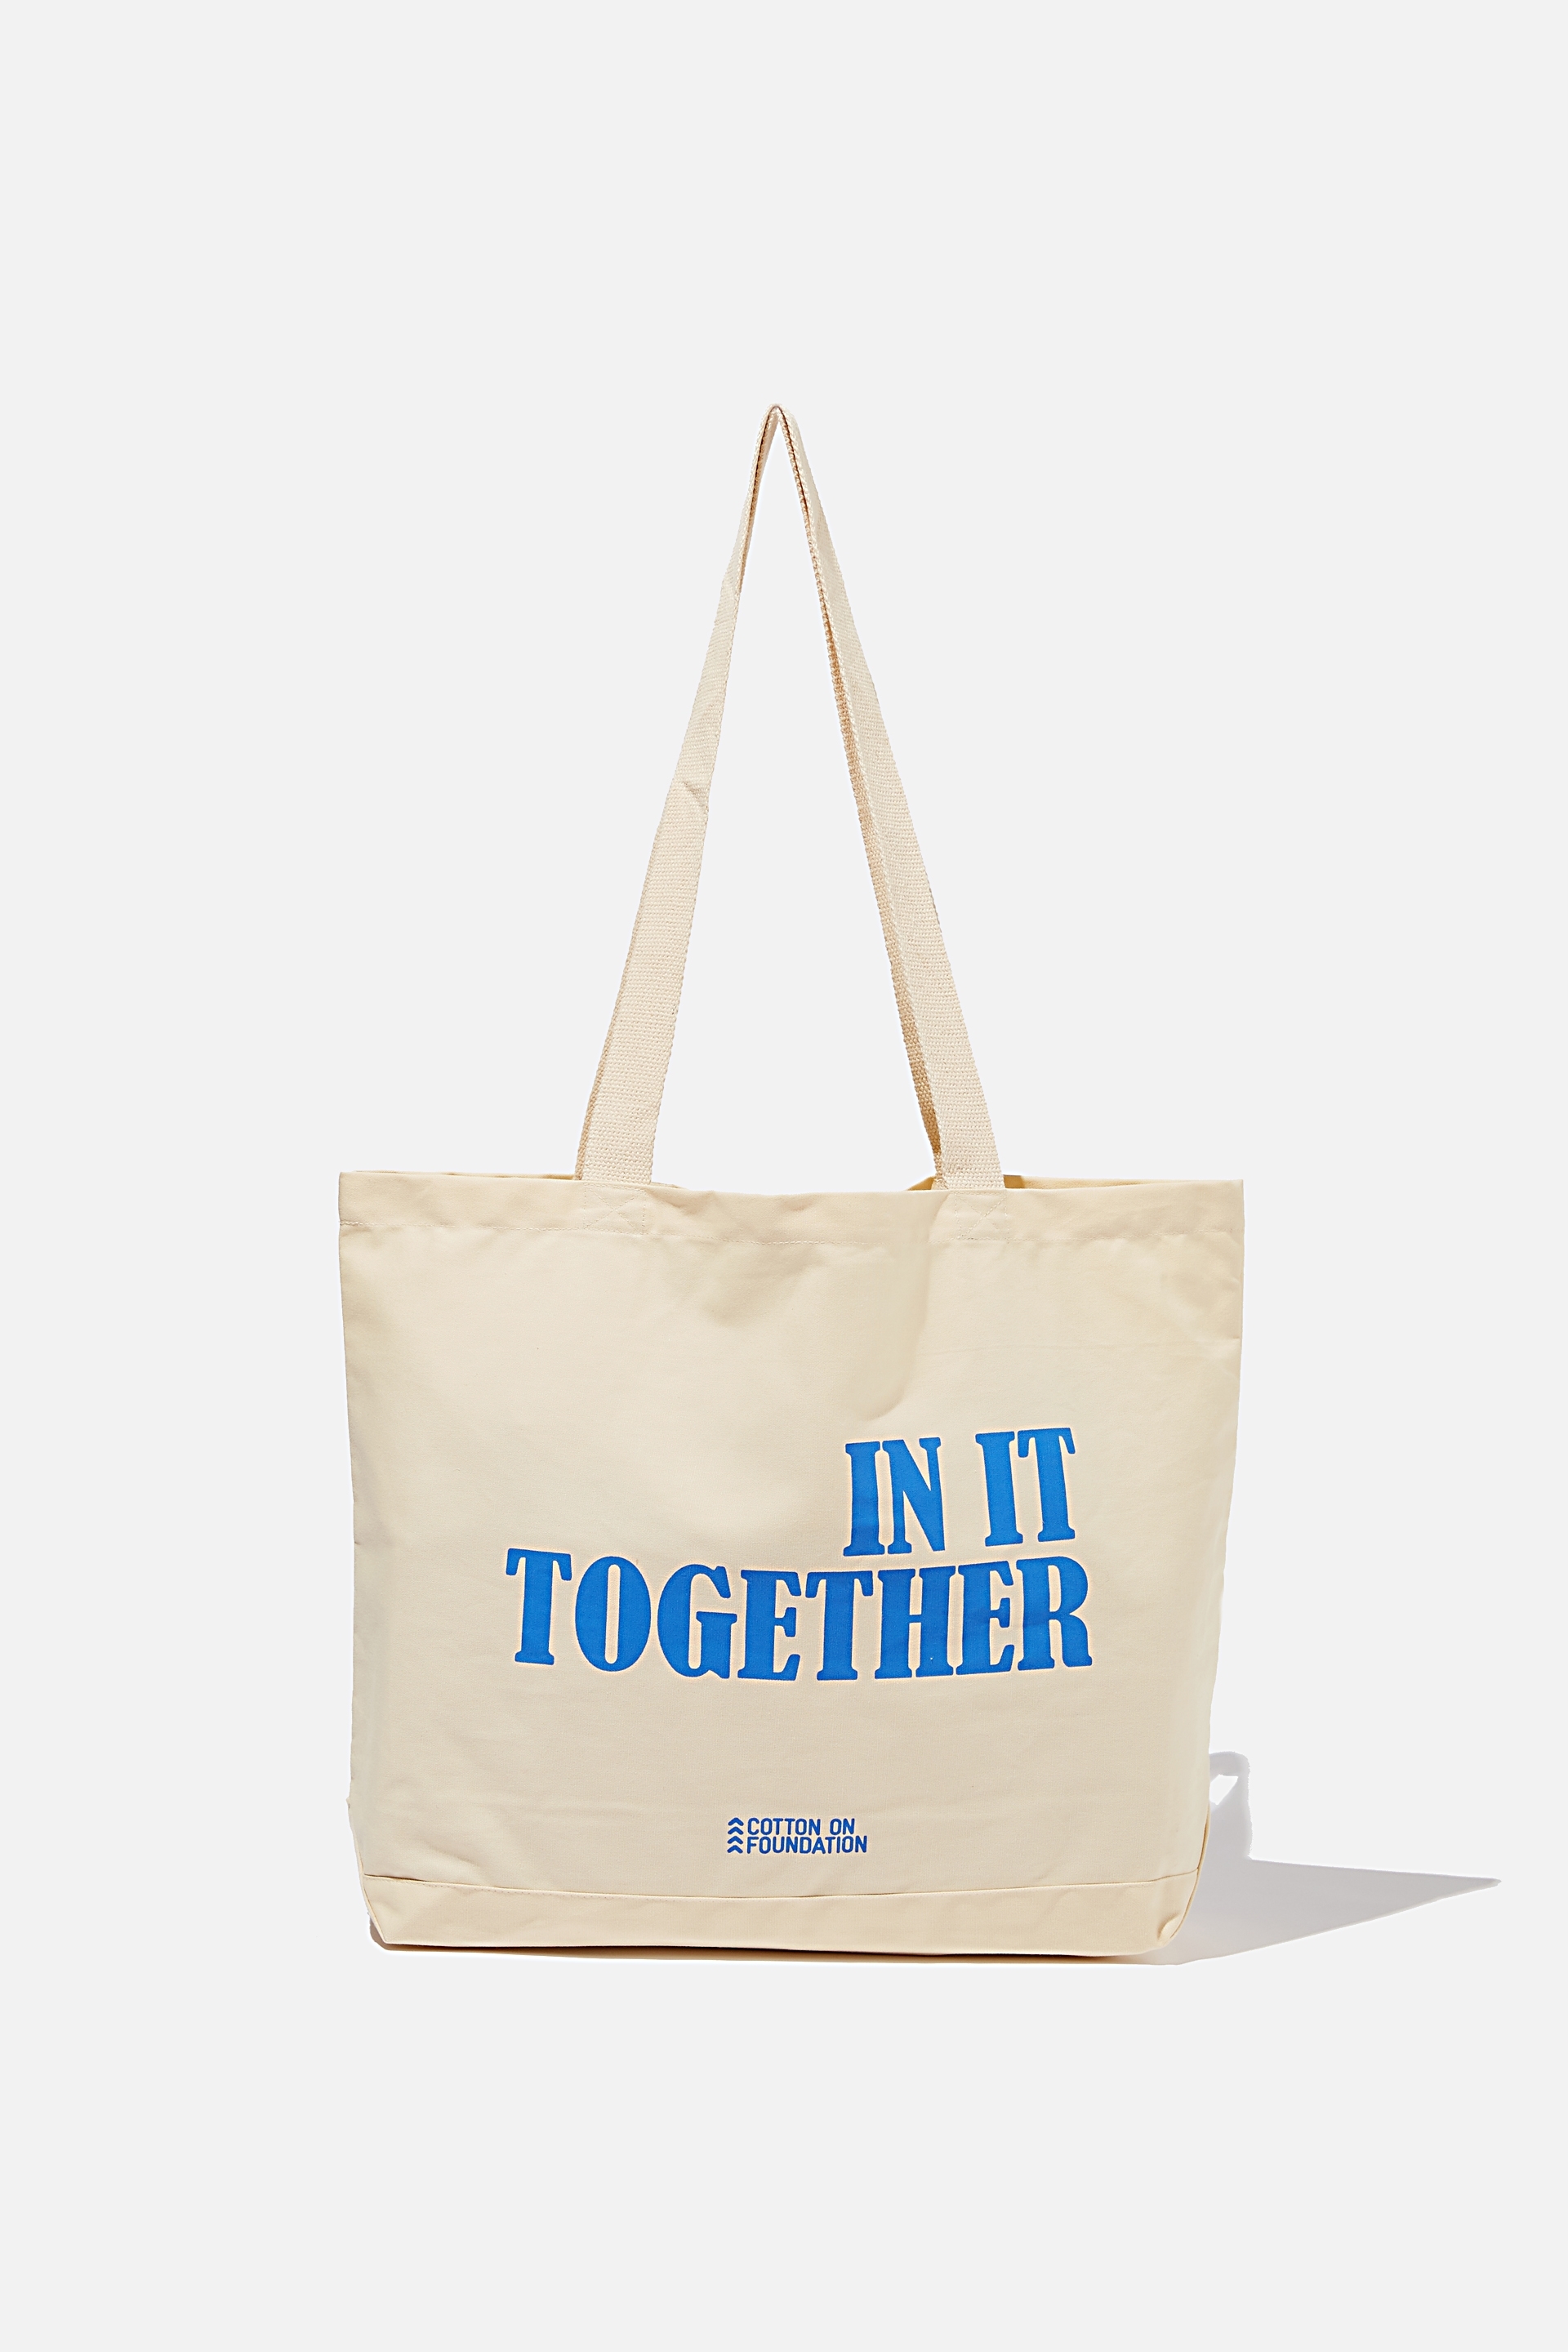 Cotton On Foundation - Foundation Exclusive Tote Bag - In it together/blue text